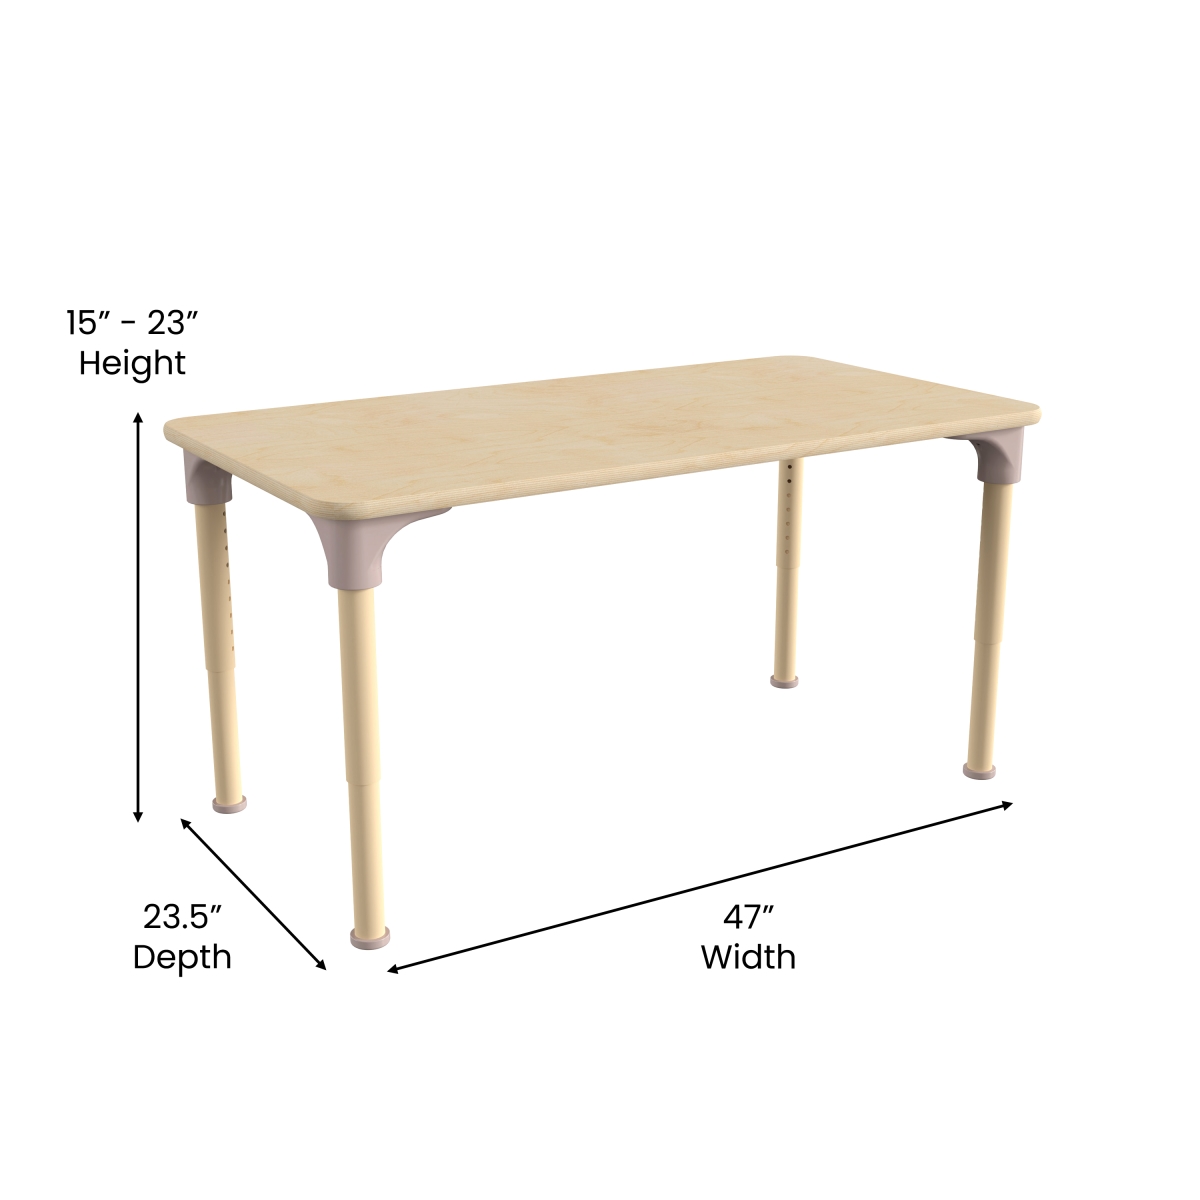 Picture of Flash Furniture MK-ME088025-GG 23.5 x 47 in. Bright Beginnings Commercial Grade Wooden Rectangle Adjustable Height Classroom Activity Table - Metal Legs Adjust From 15-23 in., Beech